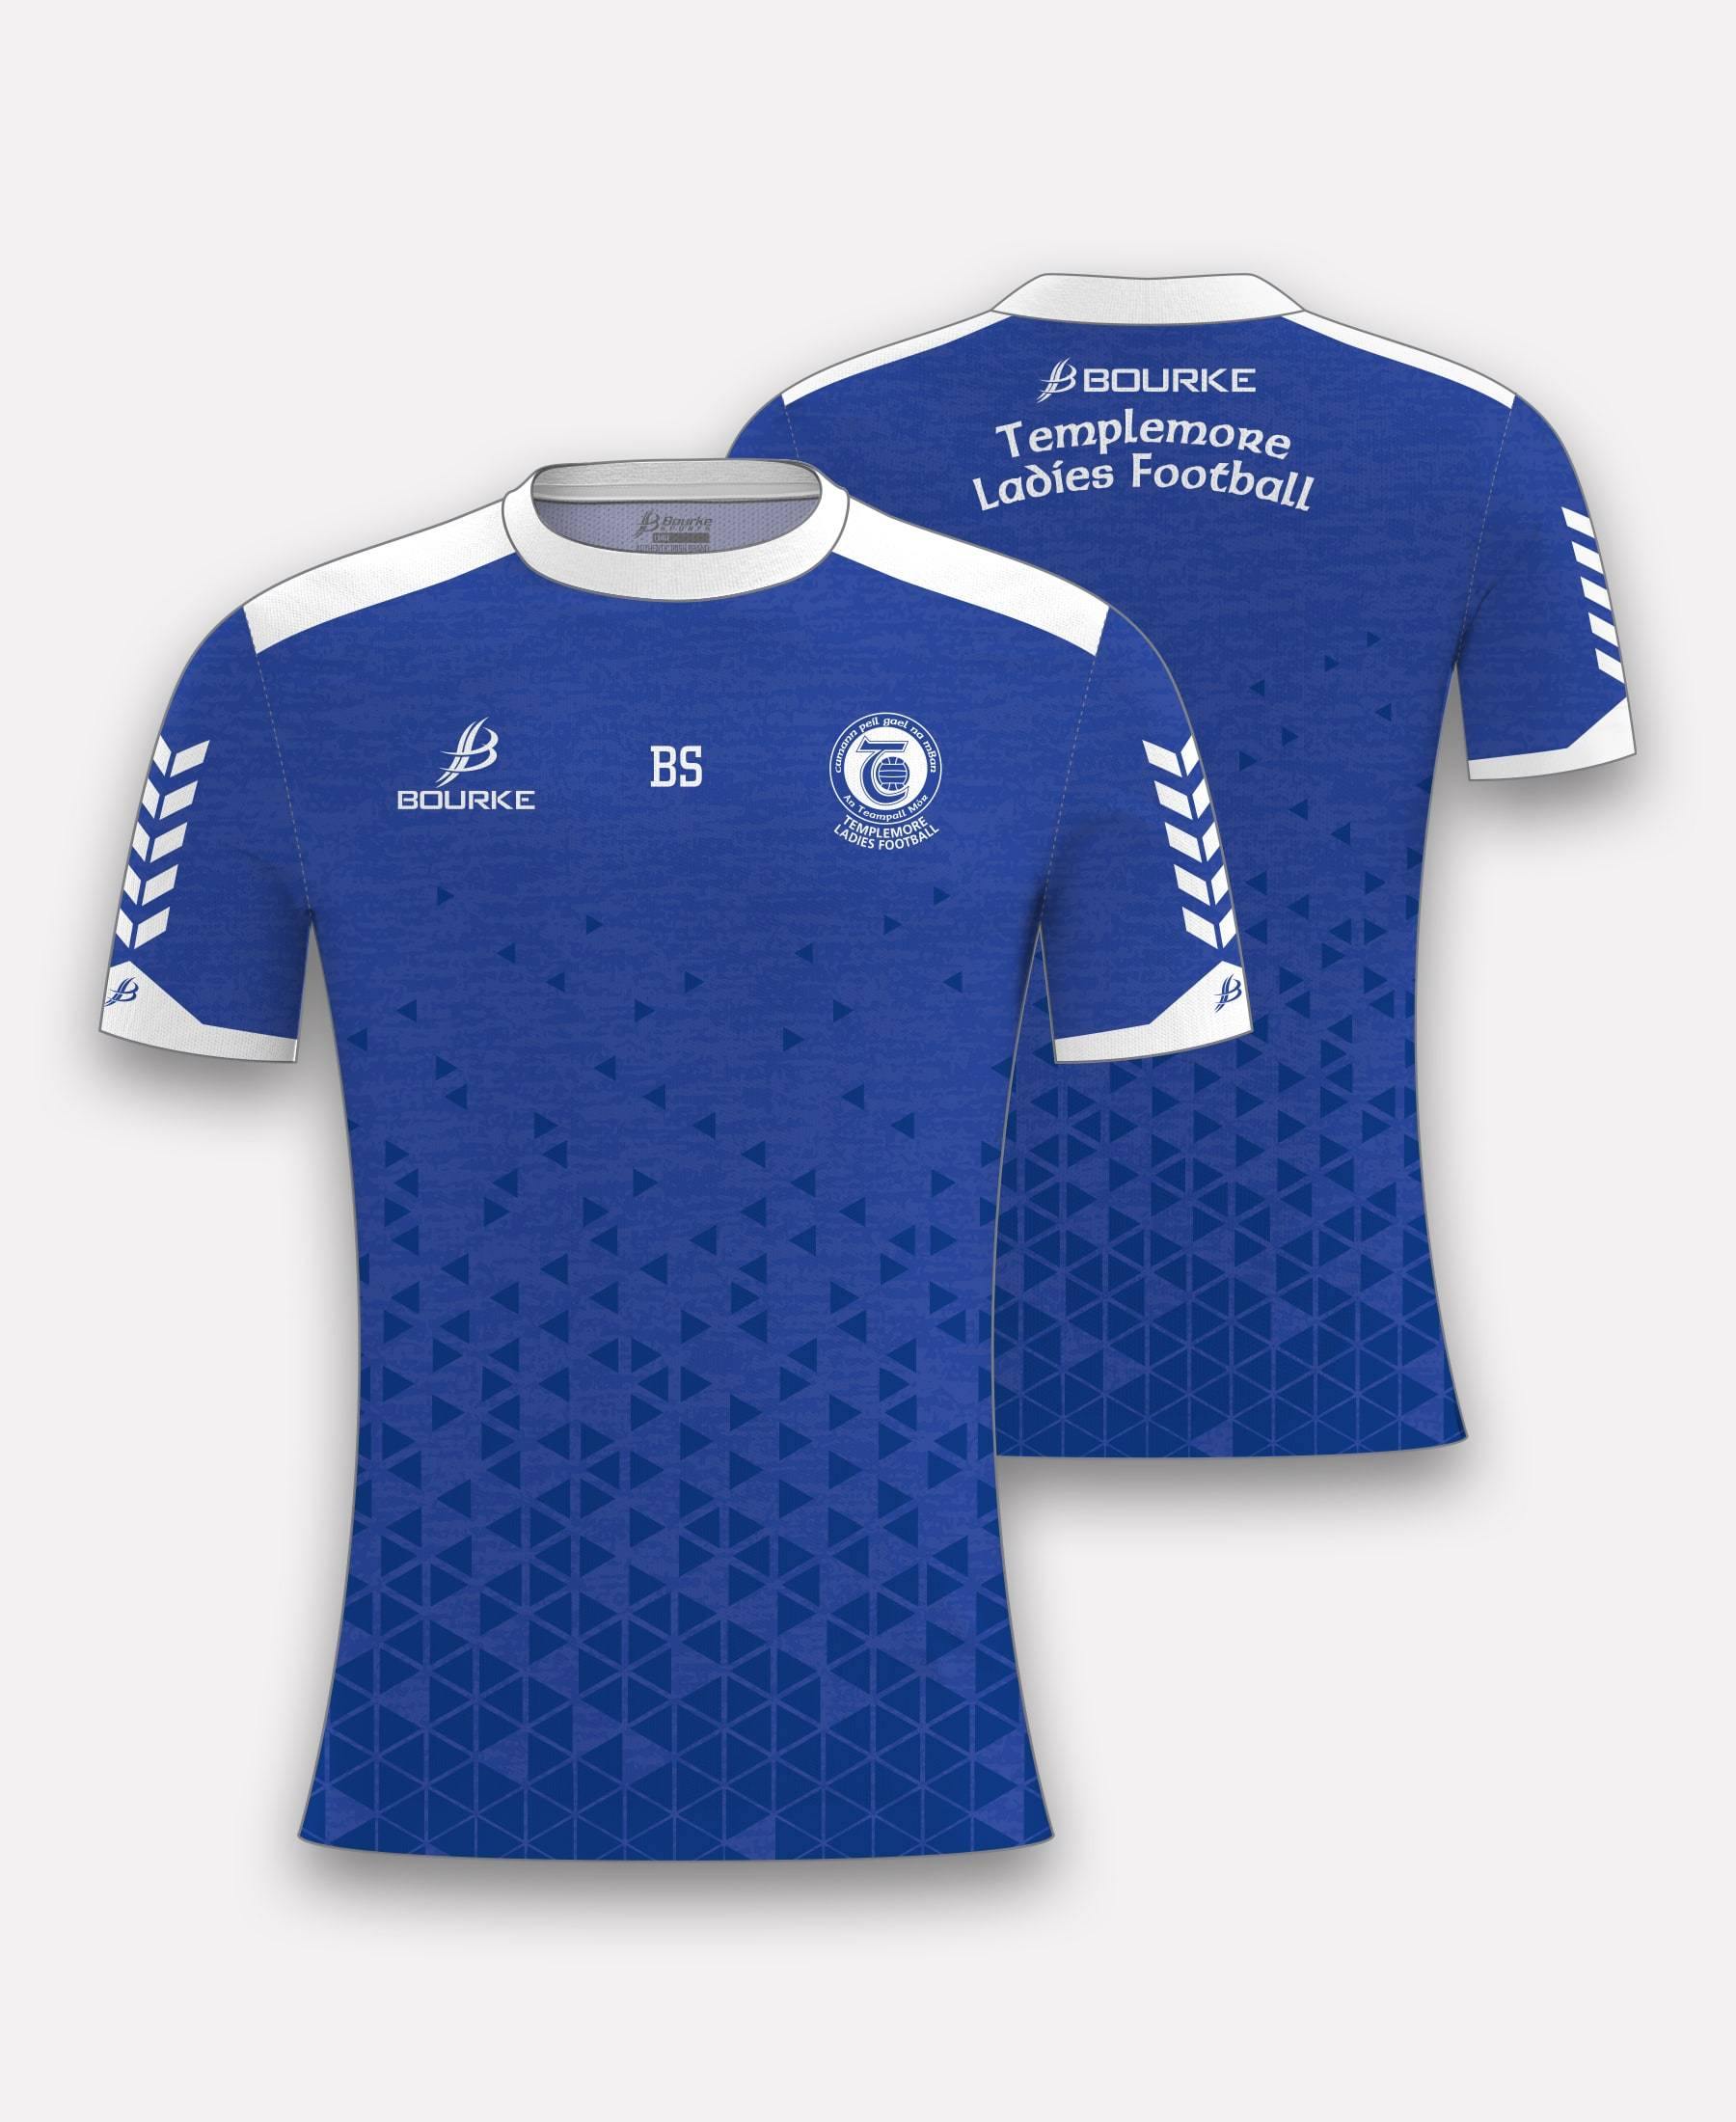 Templemore Ladies Football  Jersey - Bourke Sports Limited